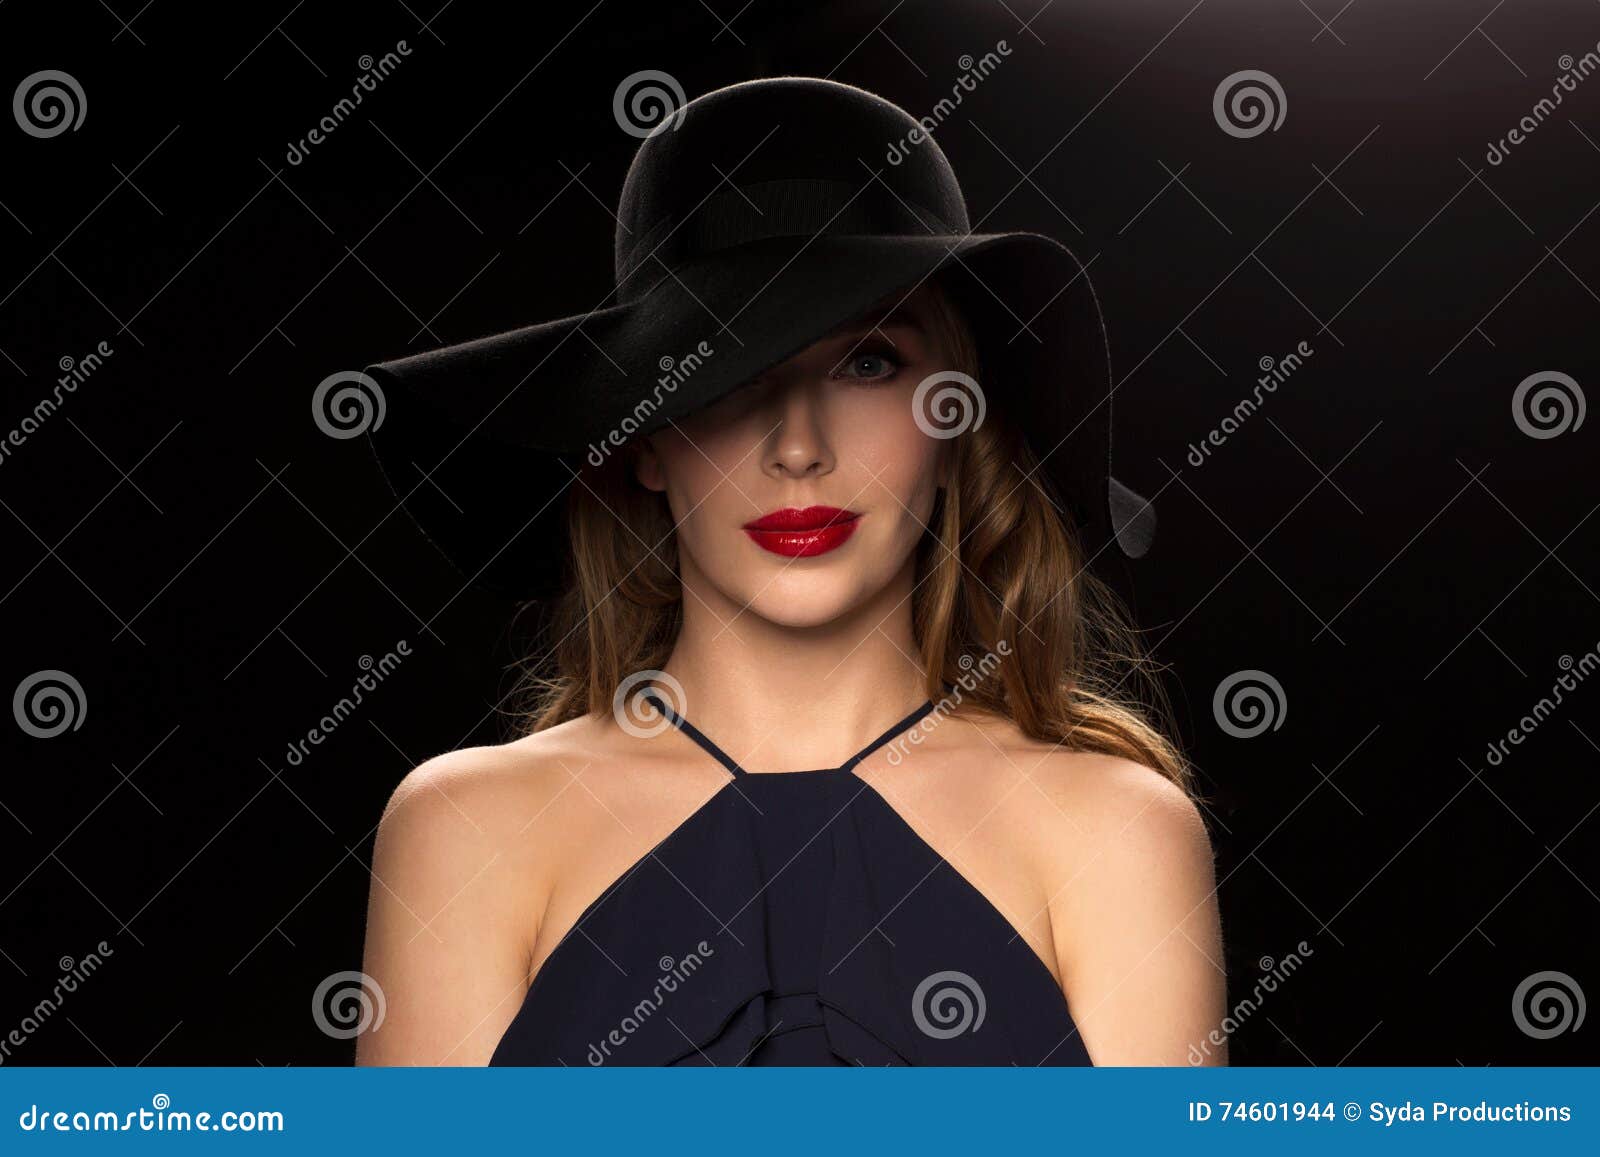 Beautiful Woman in Black Hat Over Dark Background Stock Photo - Image ...